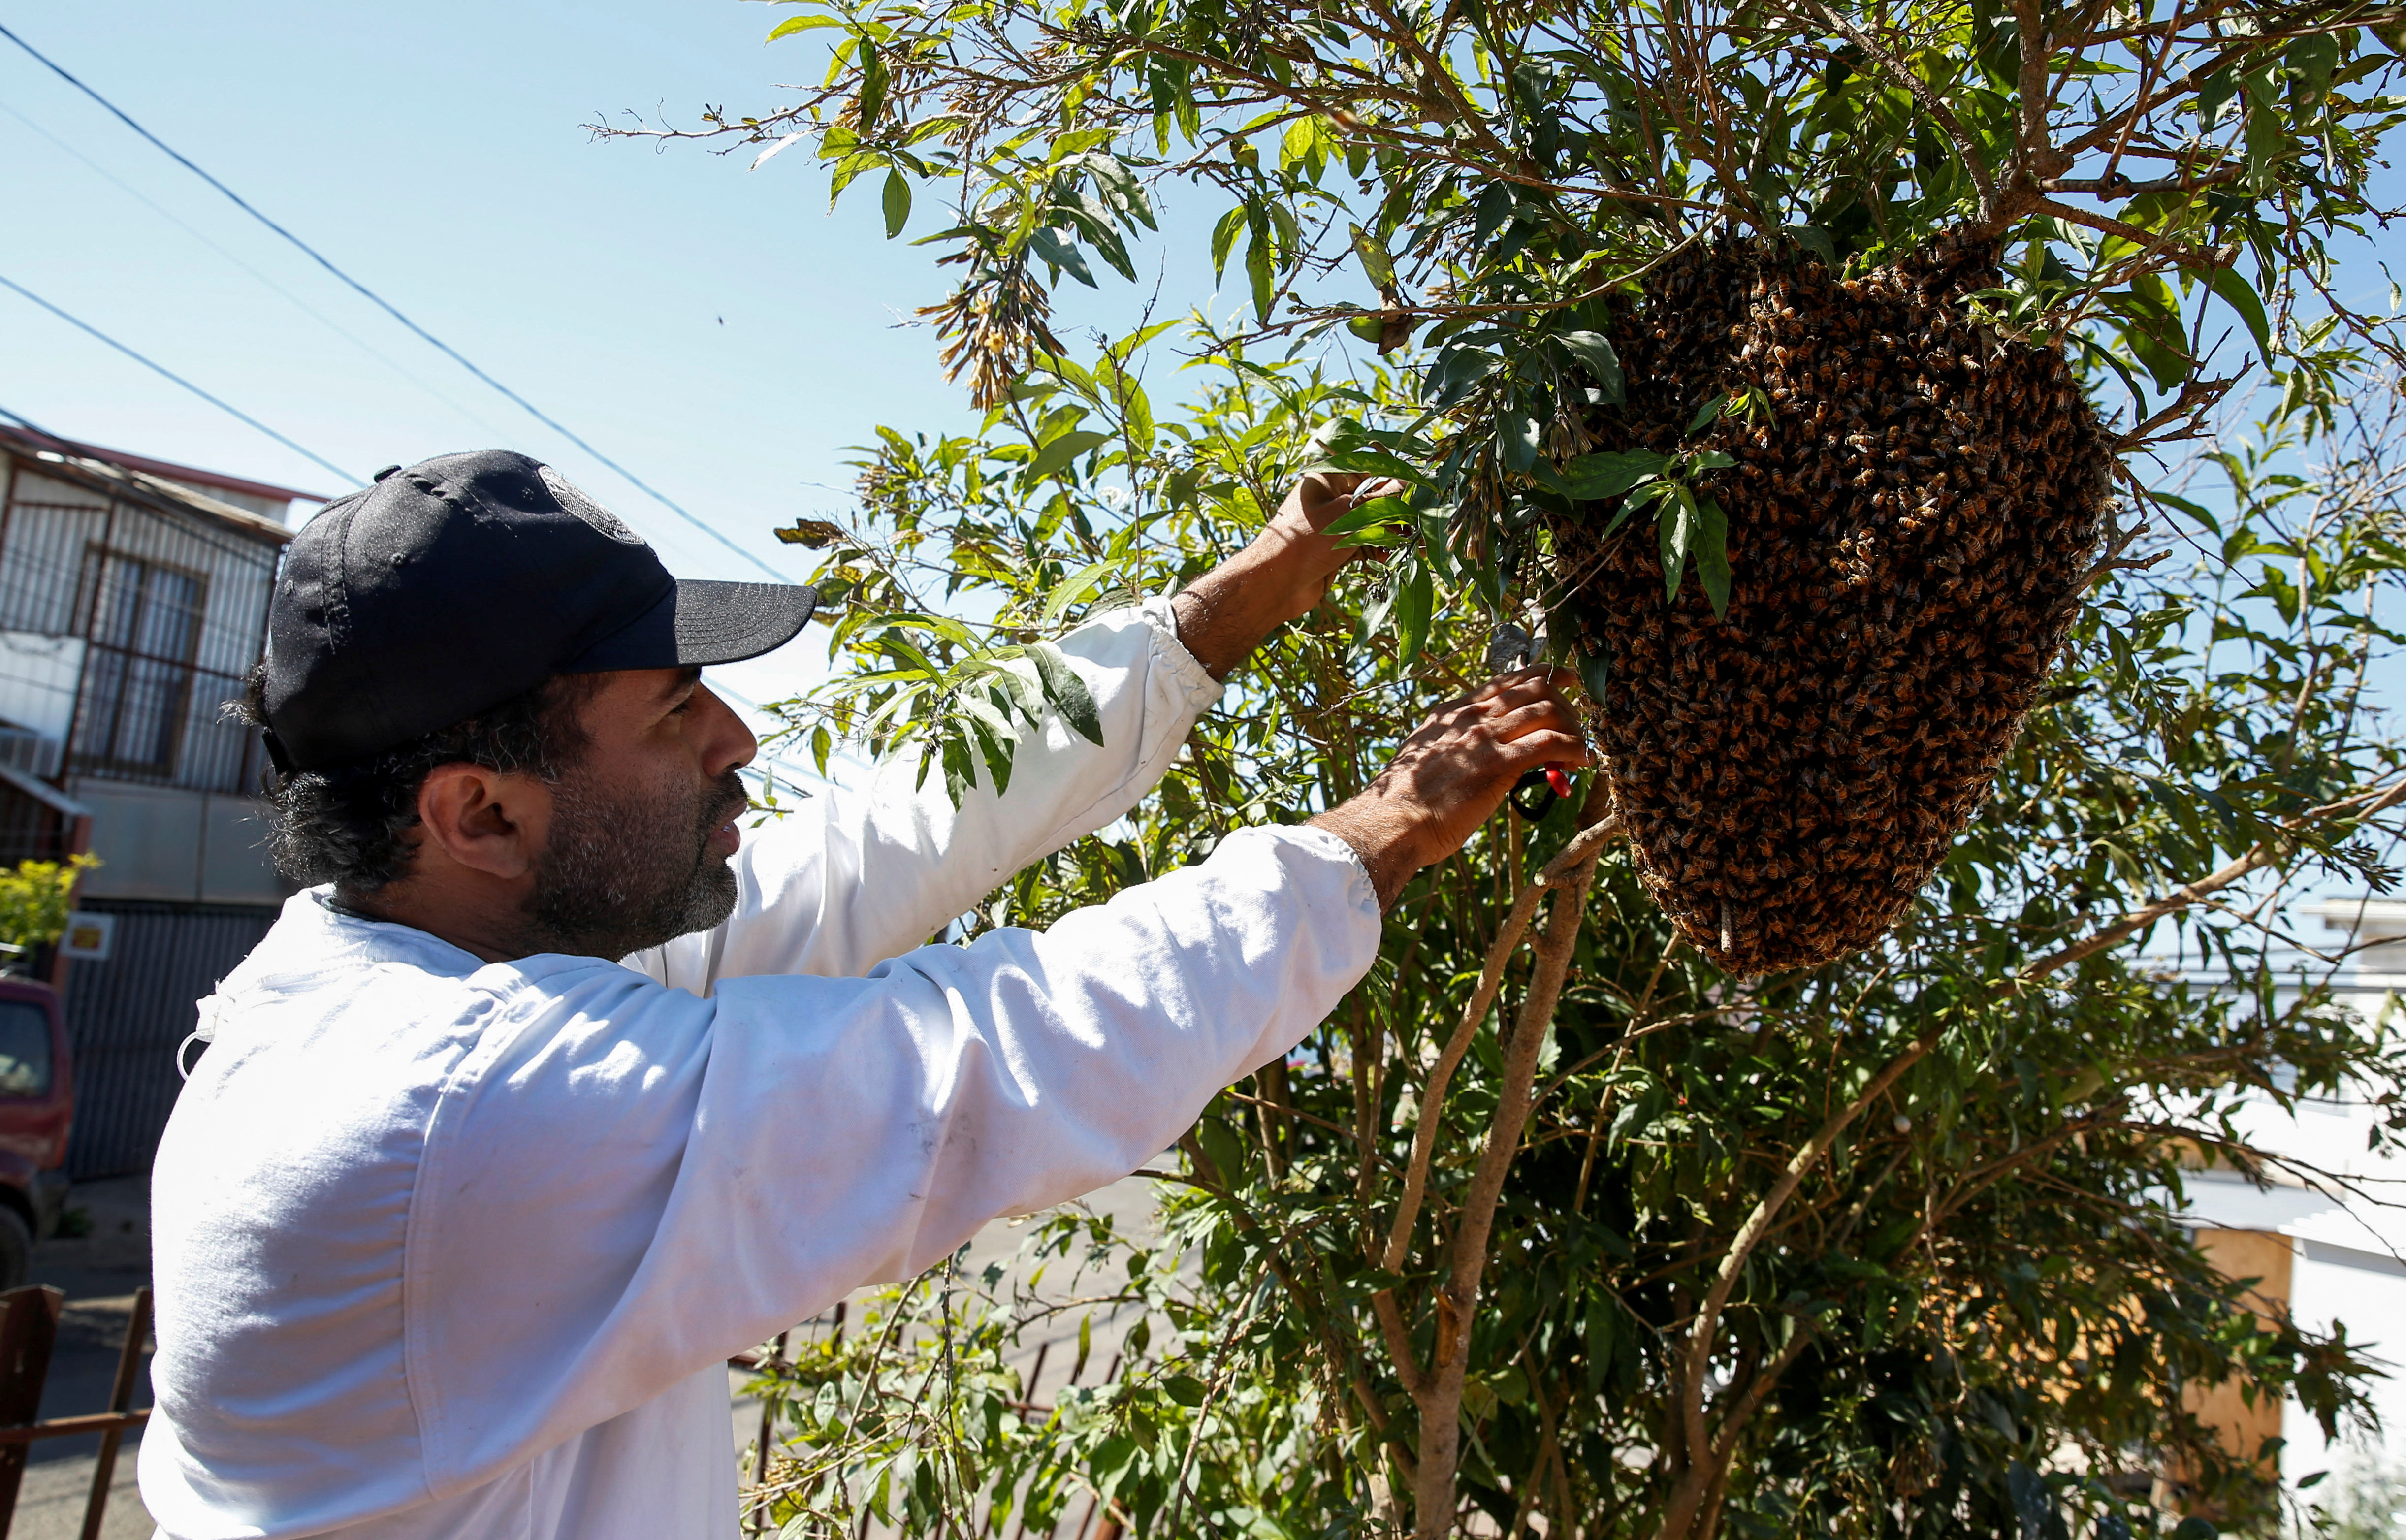 An amateur beekeeper rescues bees for conservation and protection in Vina de Mar